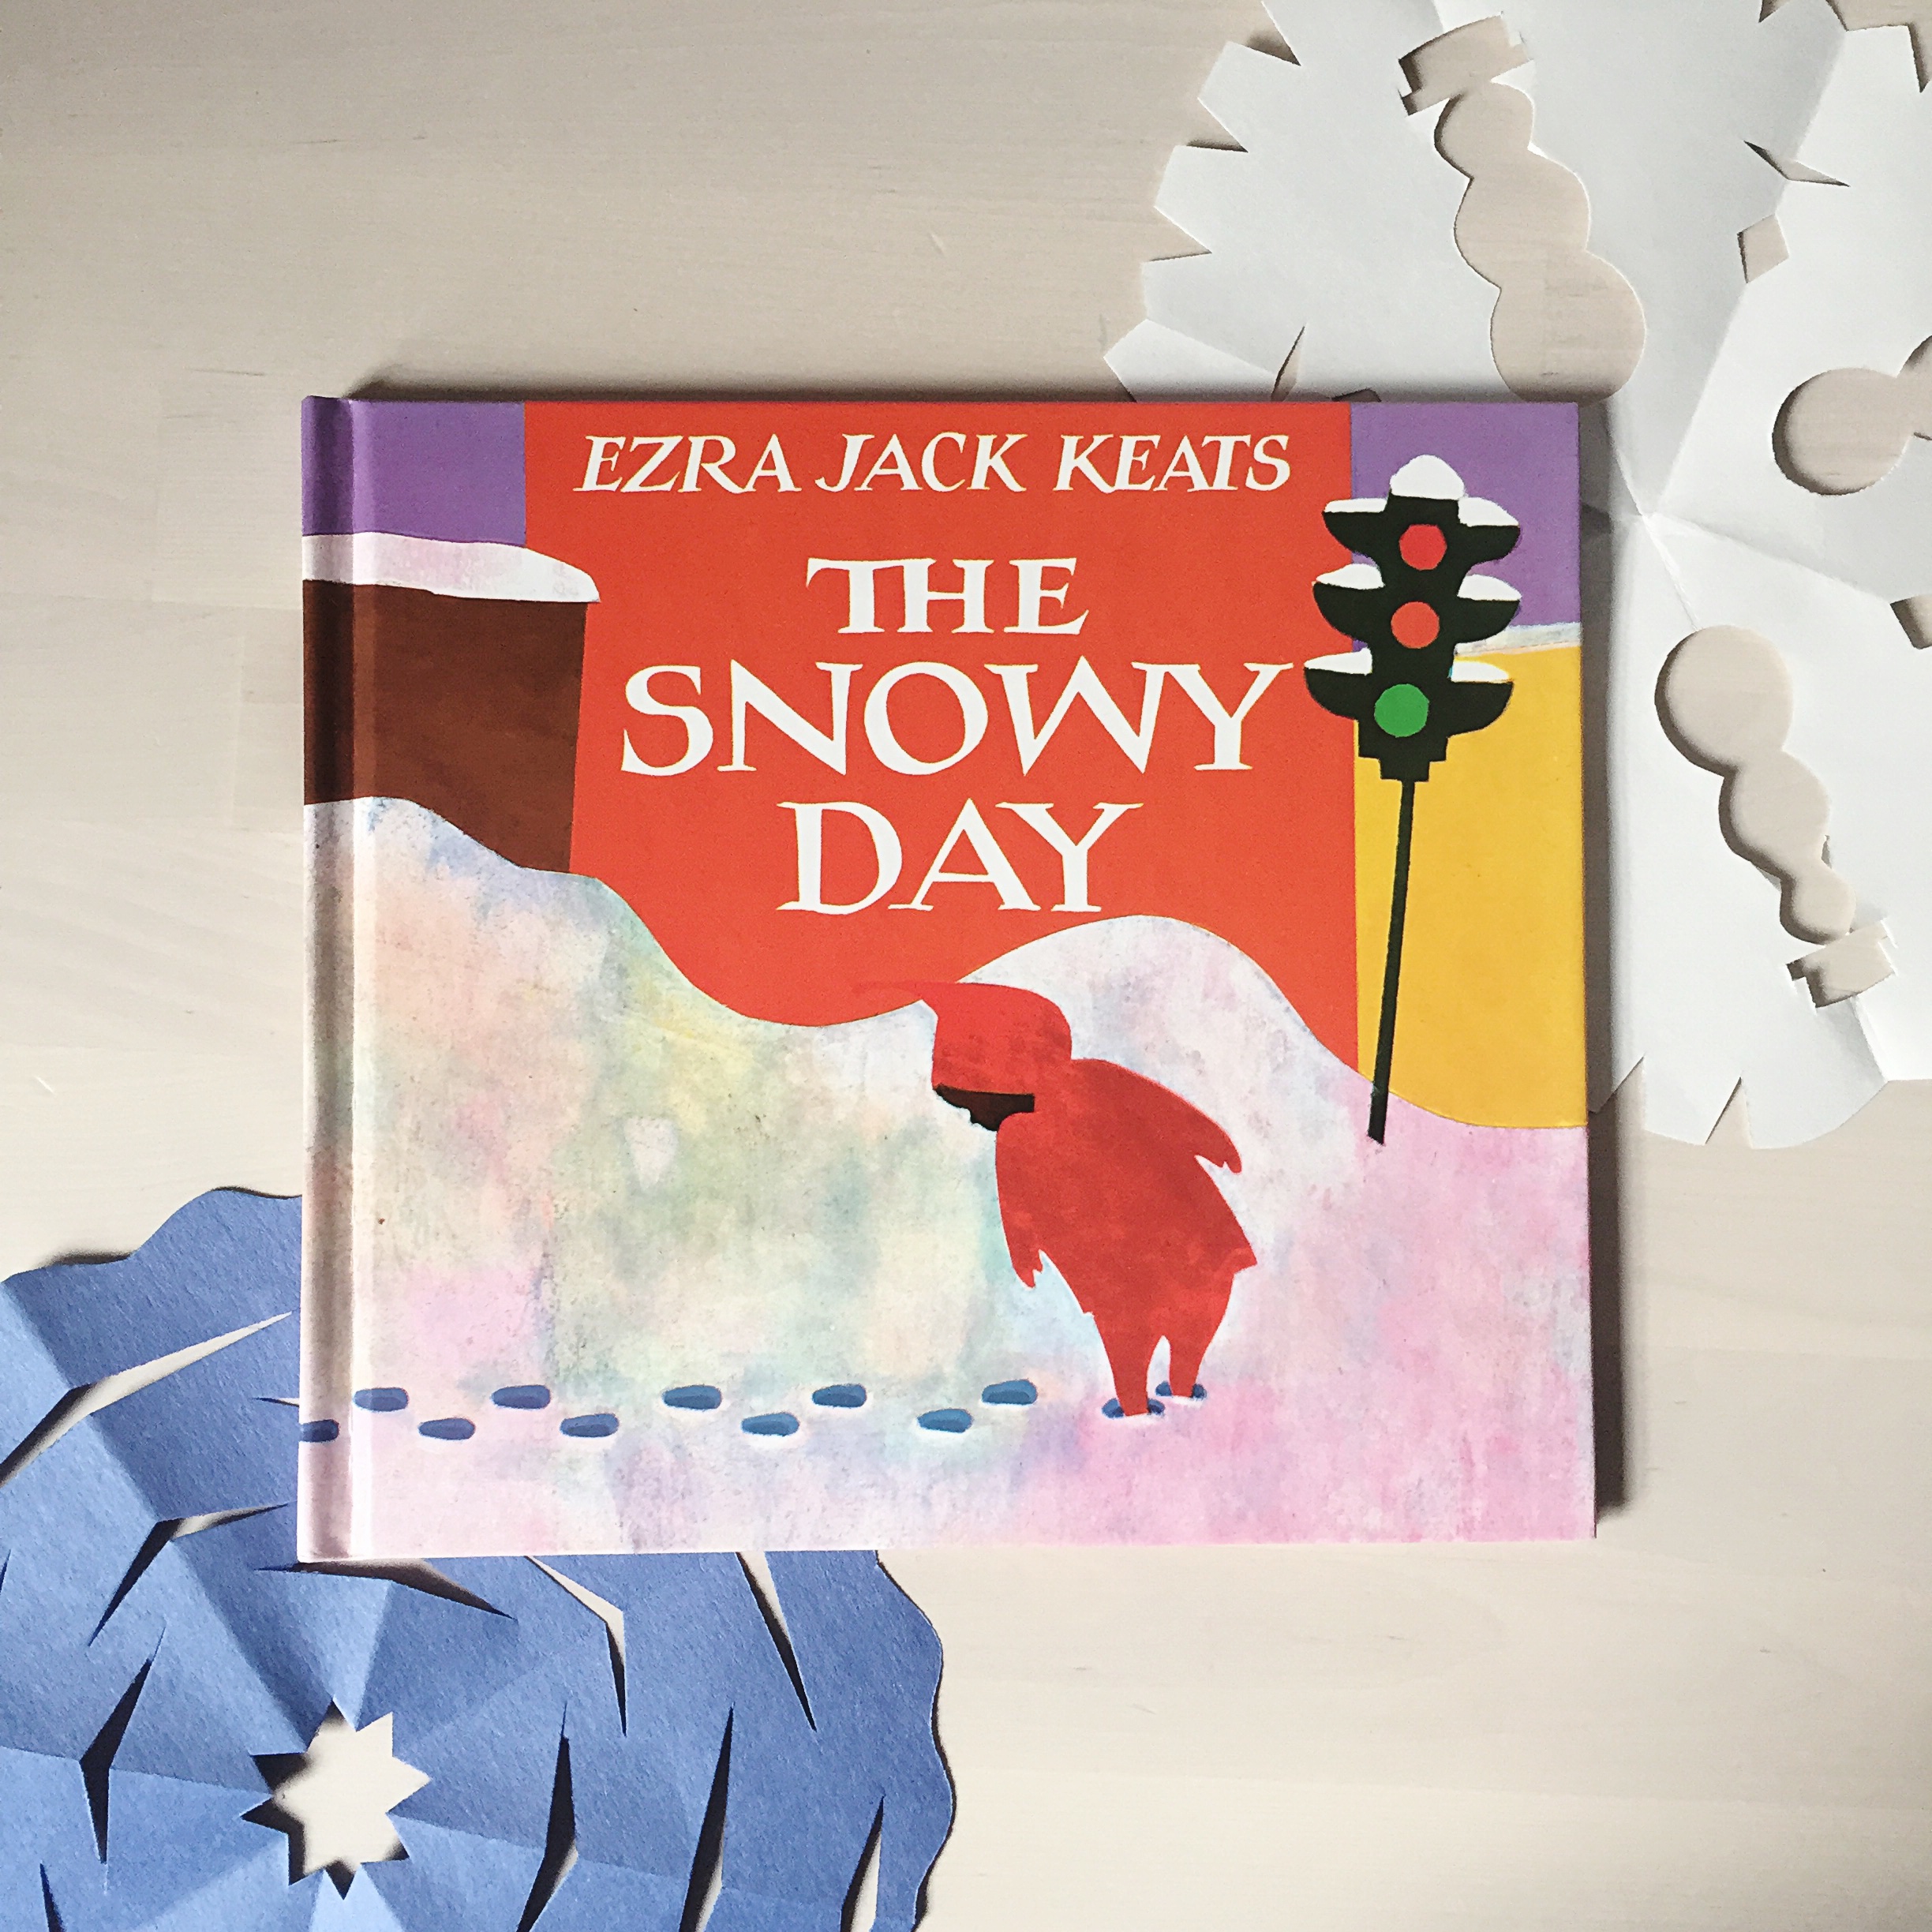 A Snowy Day Story Time from My Storytime Corner